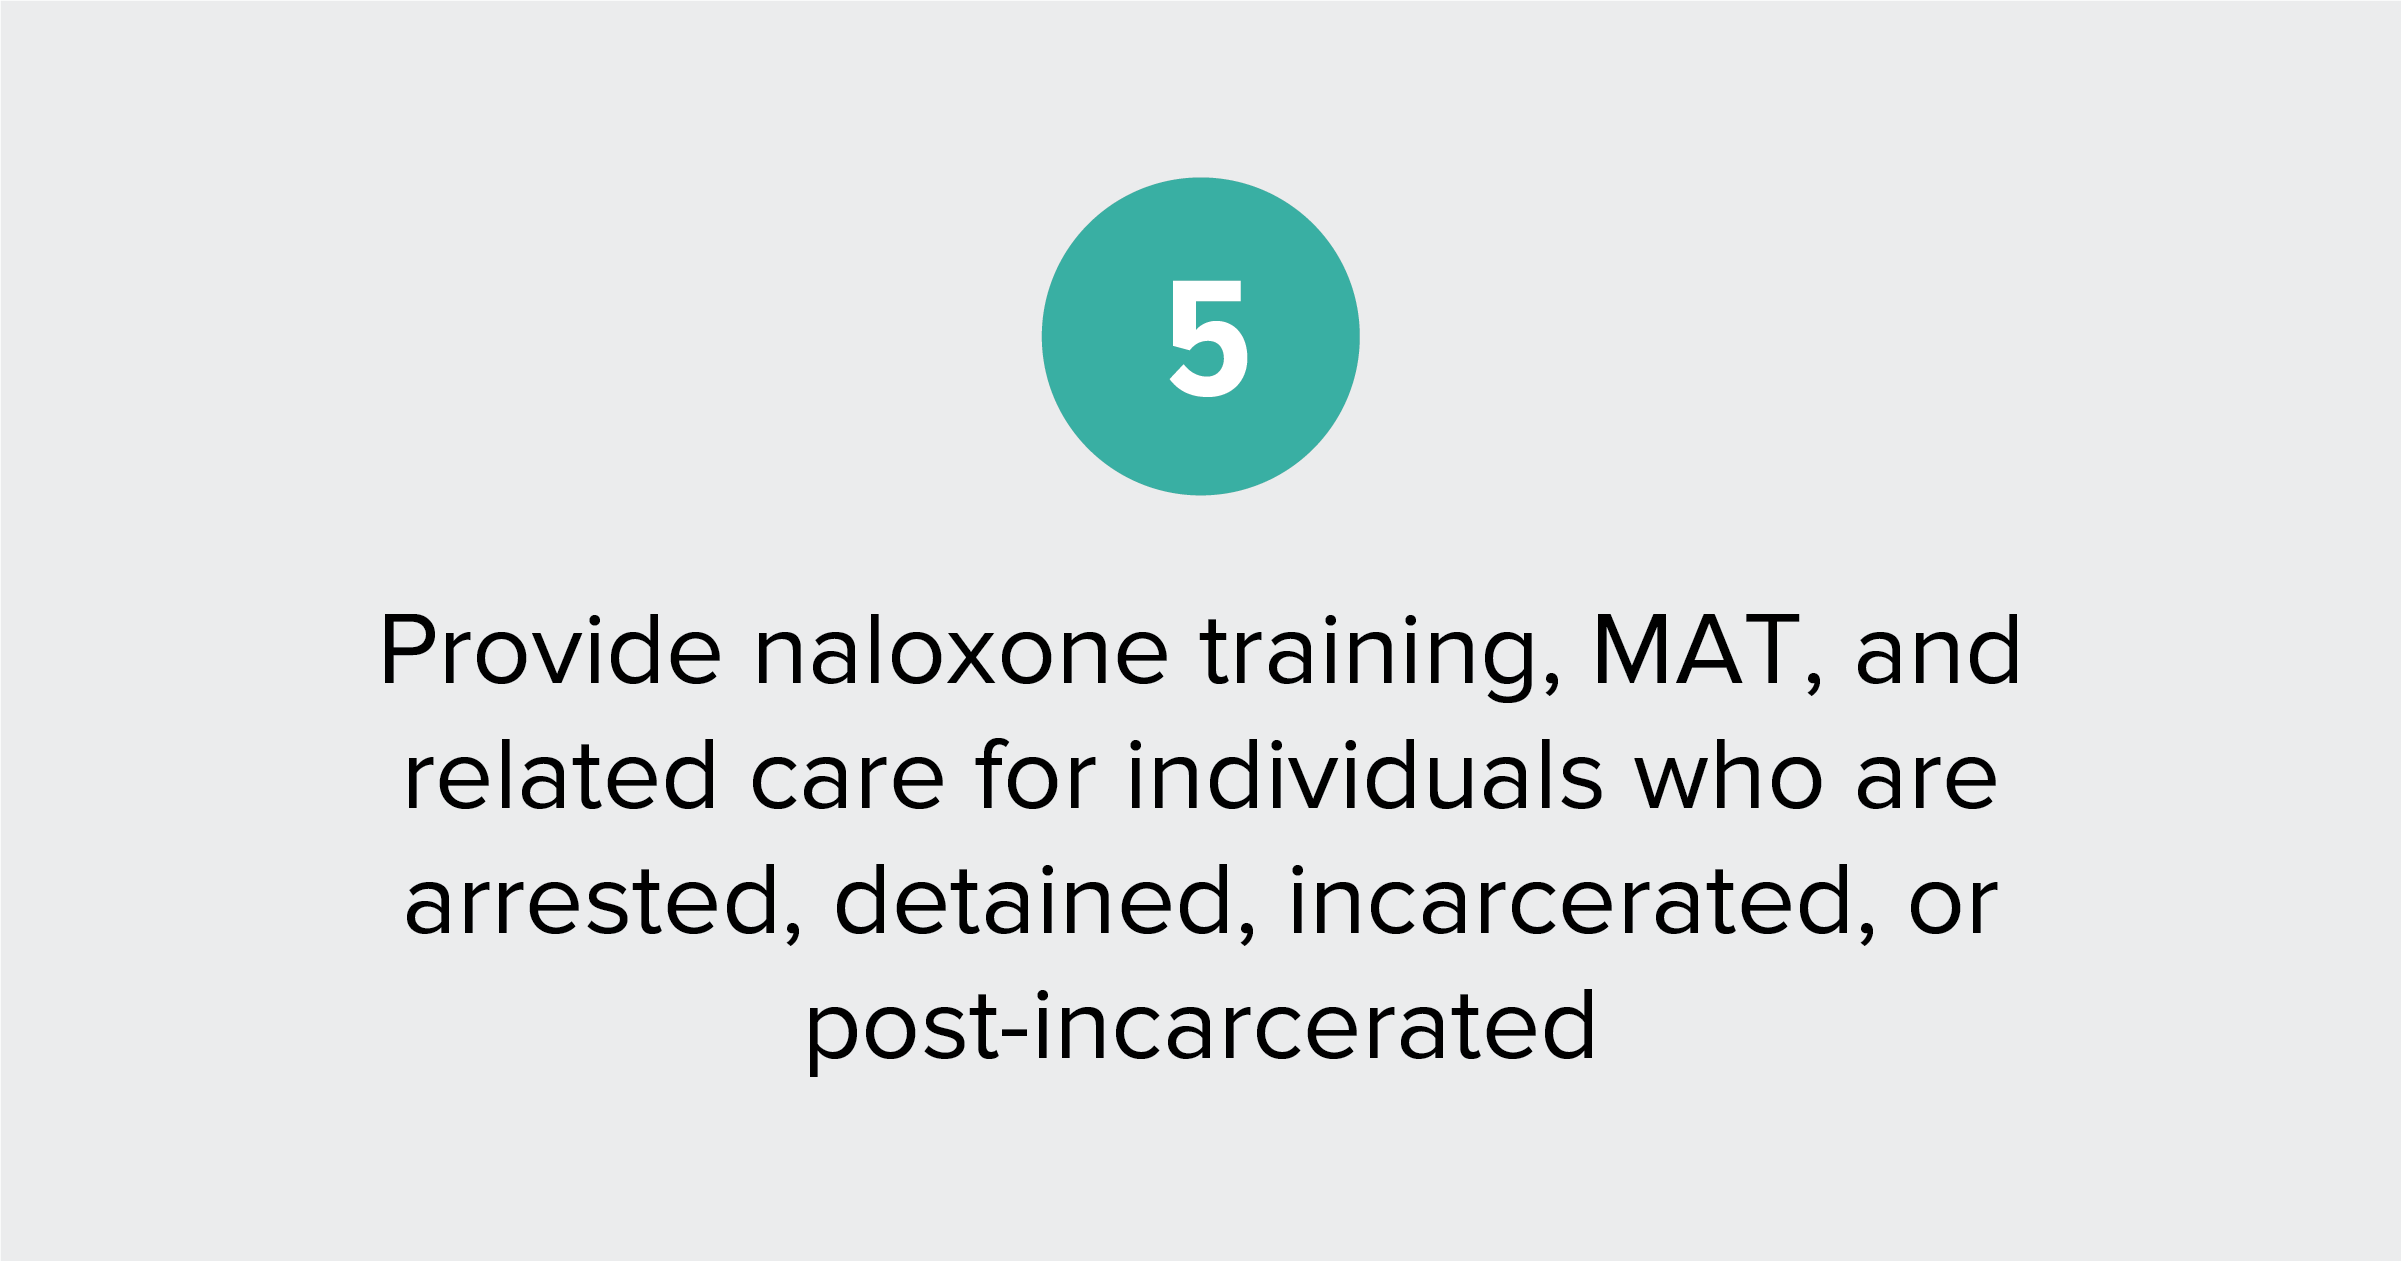 Text of report recommendation 5: Provide naloxone training, MAT access, and related care for people who are arrested, detained, incarcerated, post-incarcerated, or otherwise involved in the criminal legal system.